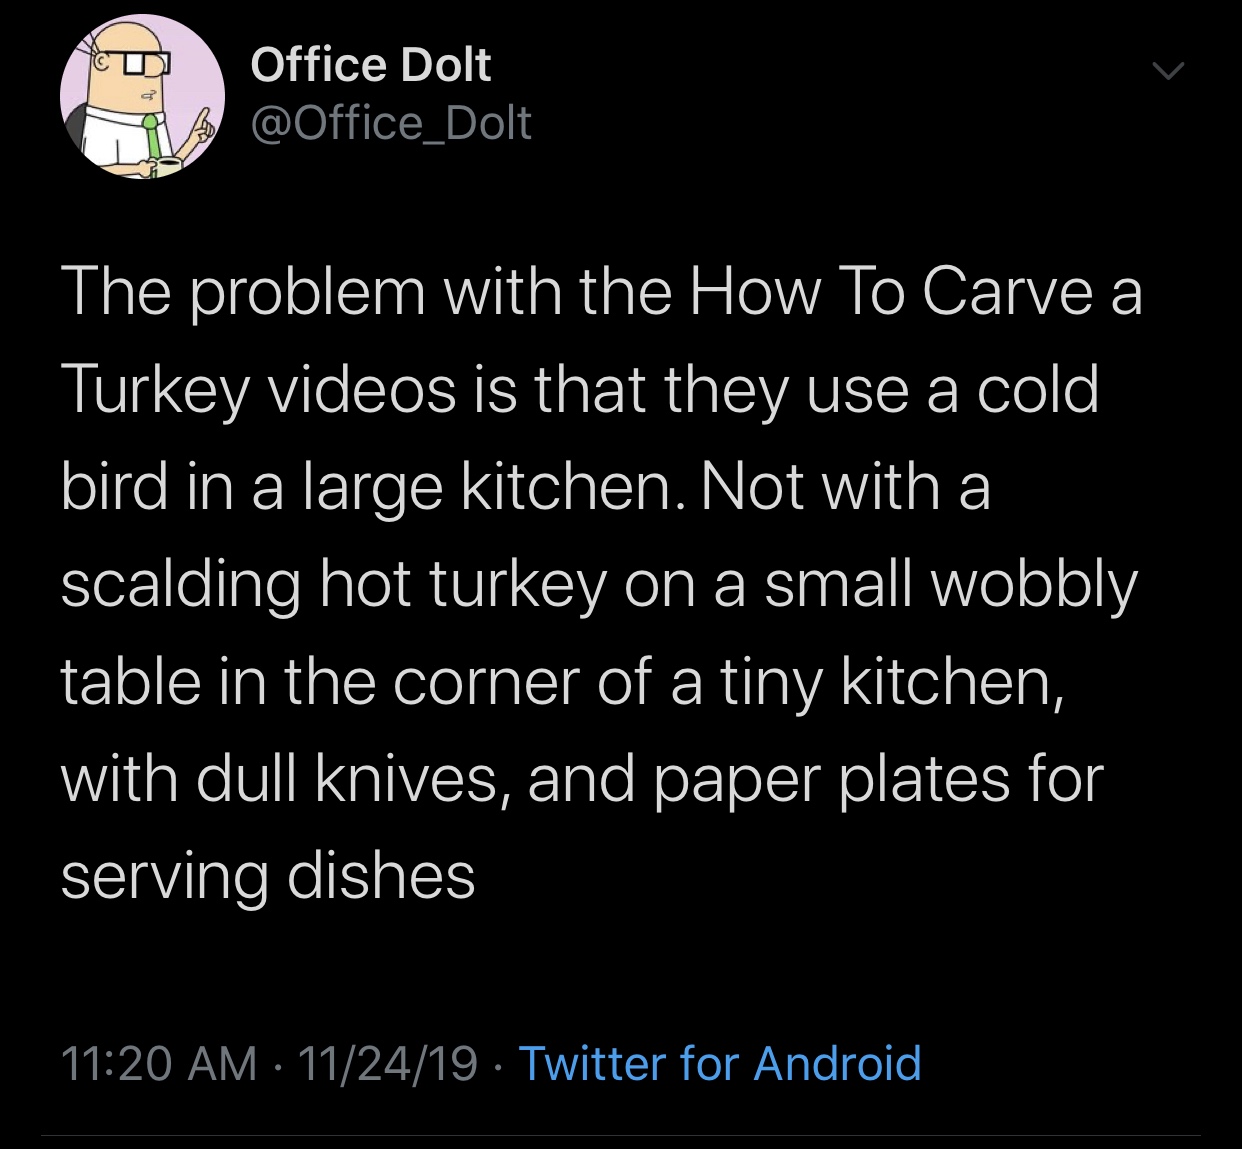 meme - Office Dolt The problem with the How To Carve a Turkey videos is that they use a cold bird in a large kitchen. Not with a scalding hot turkey on a small wobbly table in the corner of a tiny kitchen, with dull knives, and paper plates for serving di